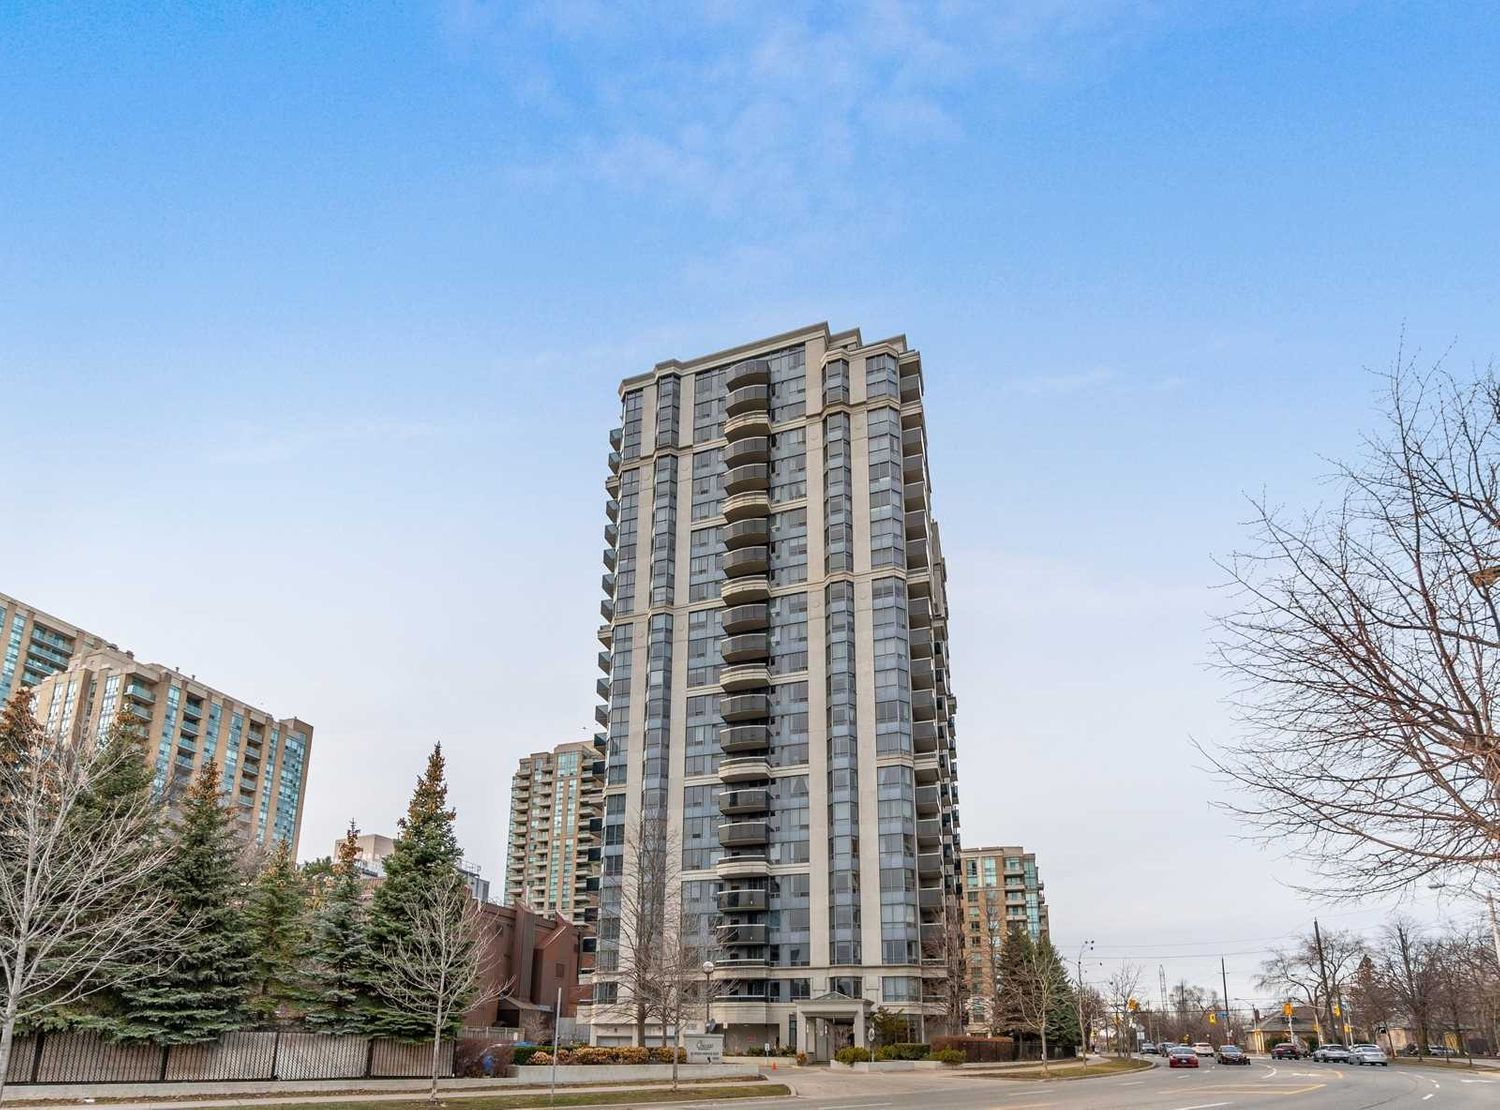 35 Finch Avenue E. Chicago Residences is located in  North York, Toronto - image #1 of 2